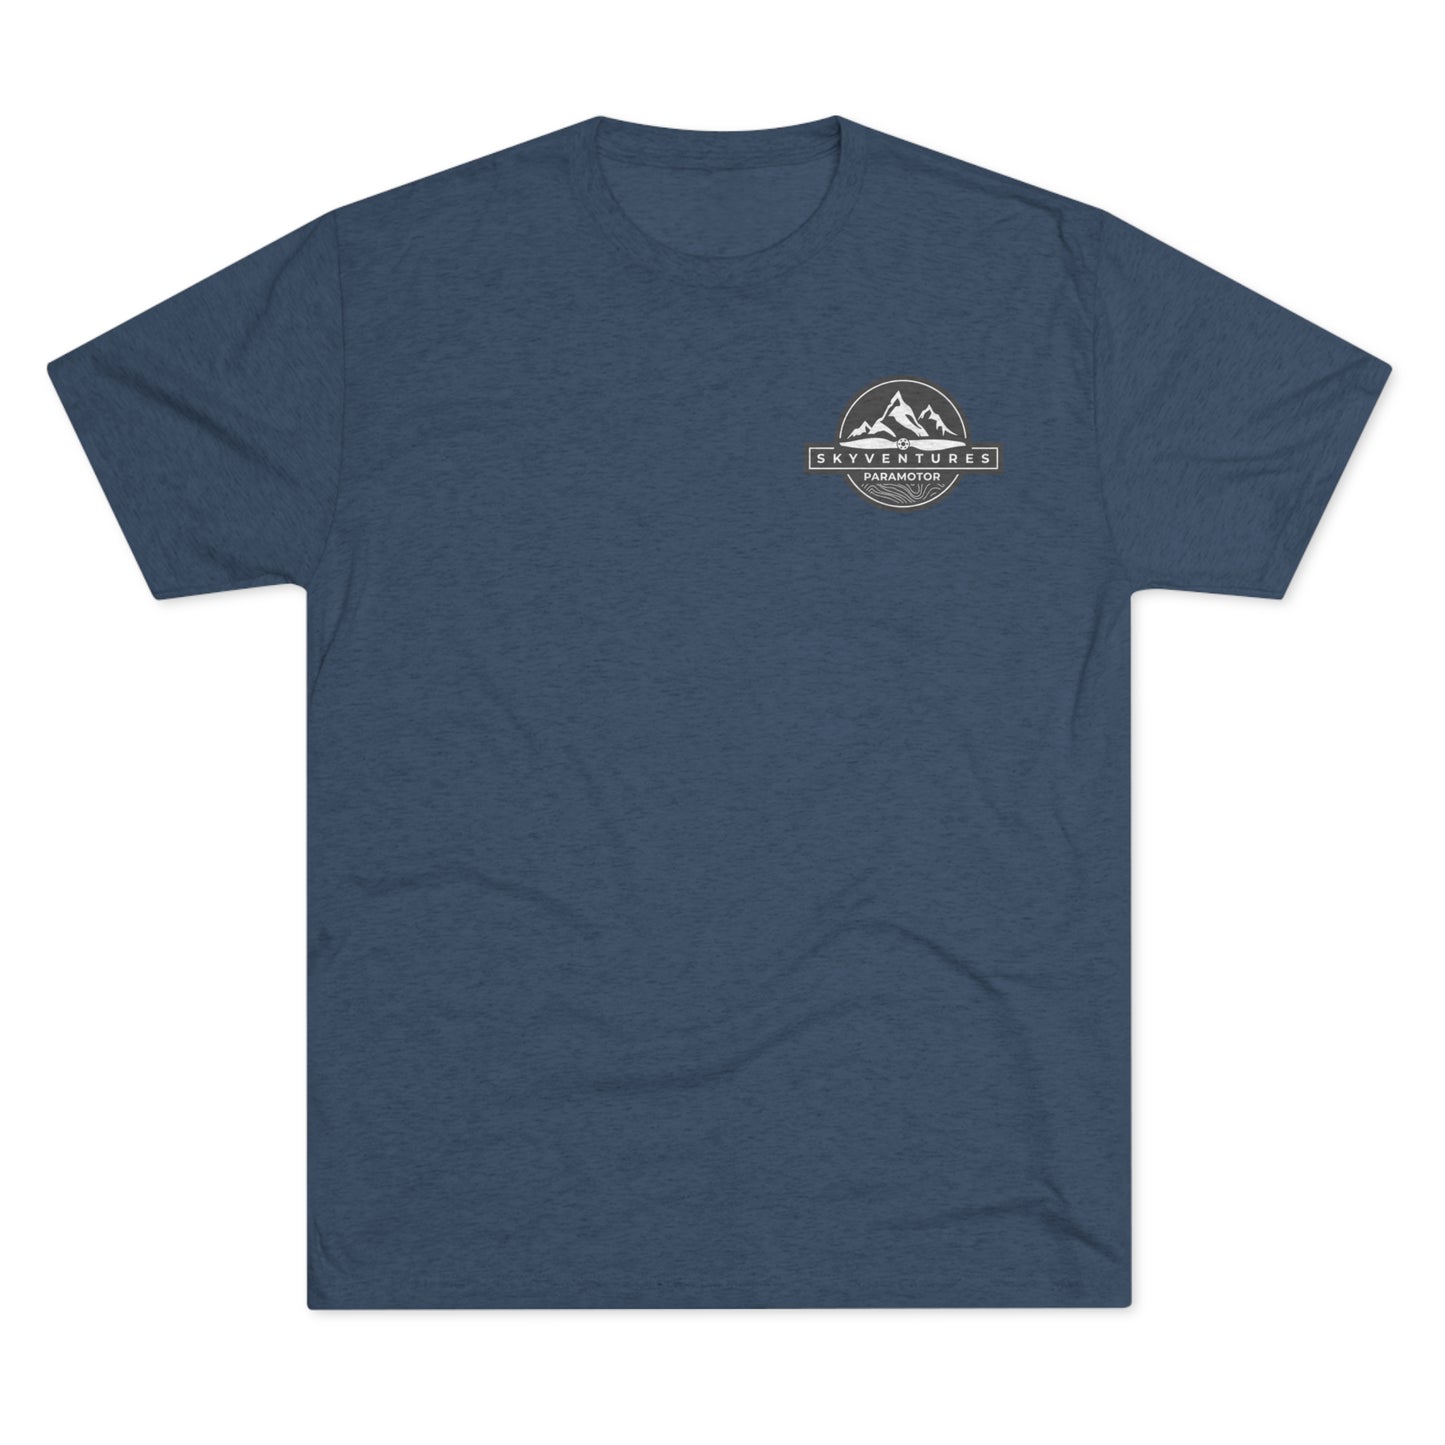 The Sky is the Destination Tee